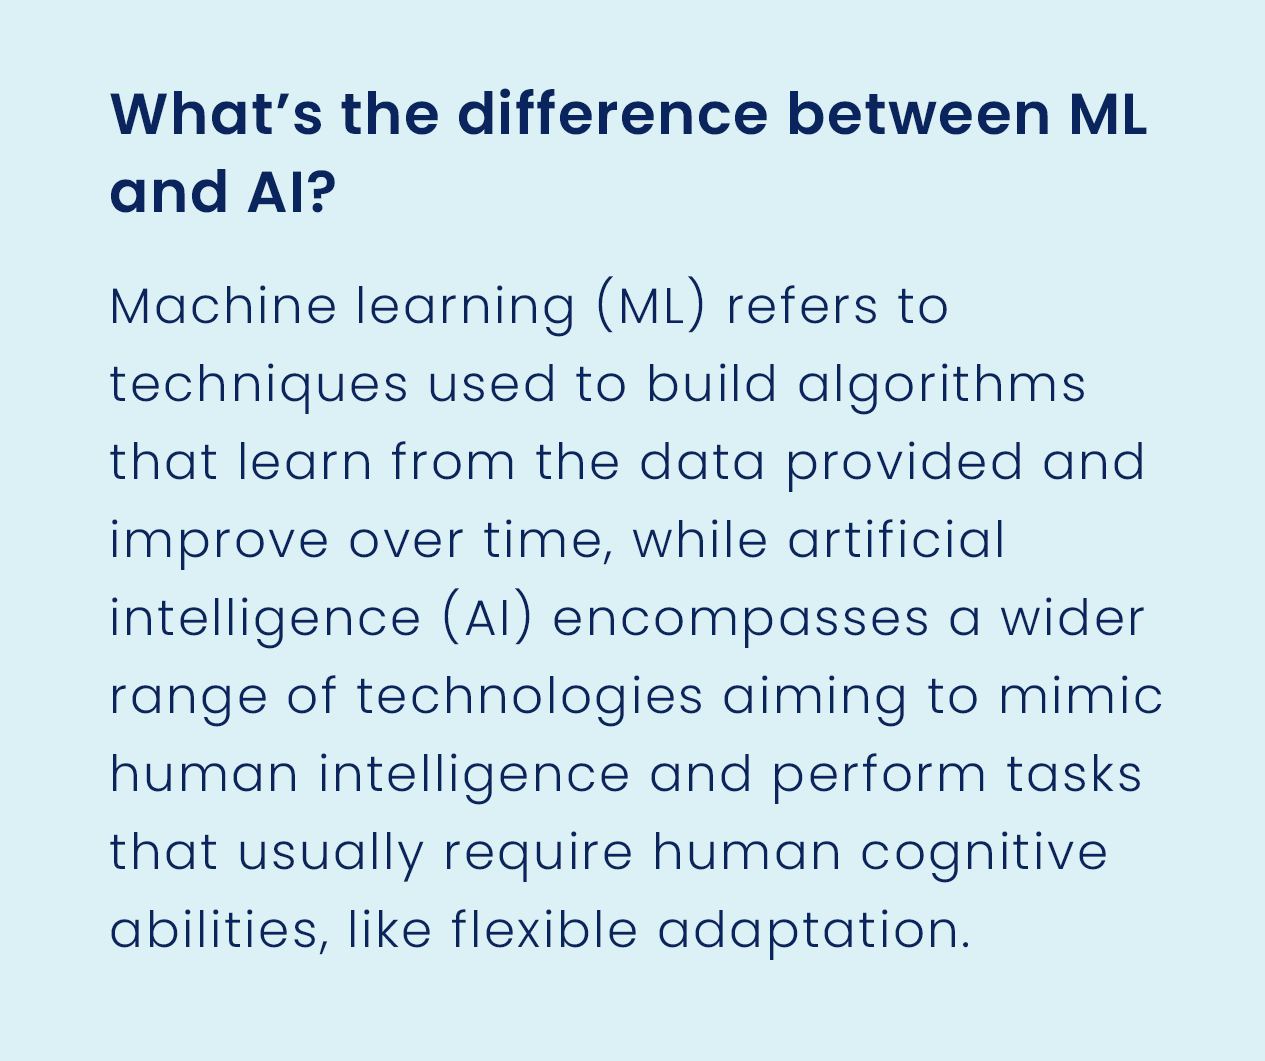 WHAT’S THE DIFFERENCE BETWEEN ML AND AI? Machine learning (ML) refers to techniques used to build algorithms that learn from the data provided and improve over time, while artificial intelligence (AI) encompasses a wider range of technologies aiming to mimic human intelligence and perform tasks that usually require human cognitive abilities, like flexible adaptation.